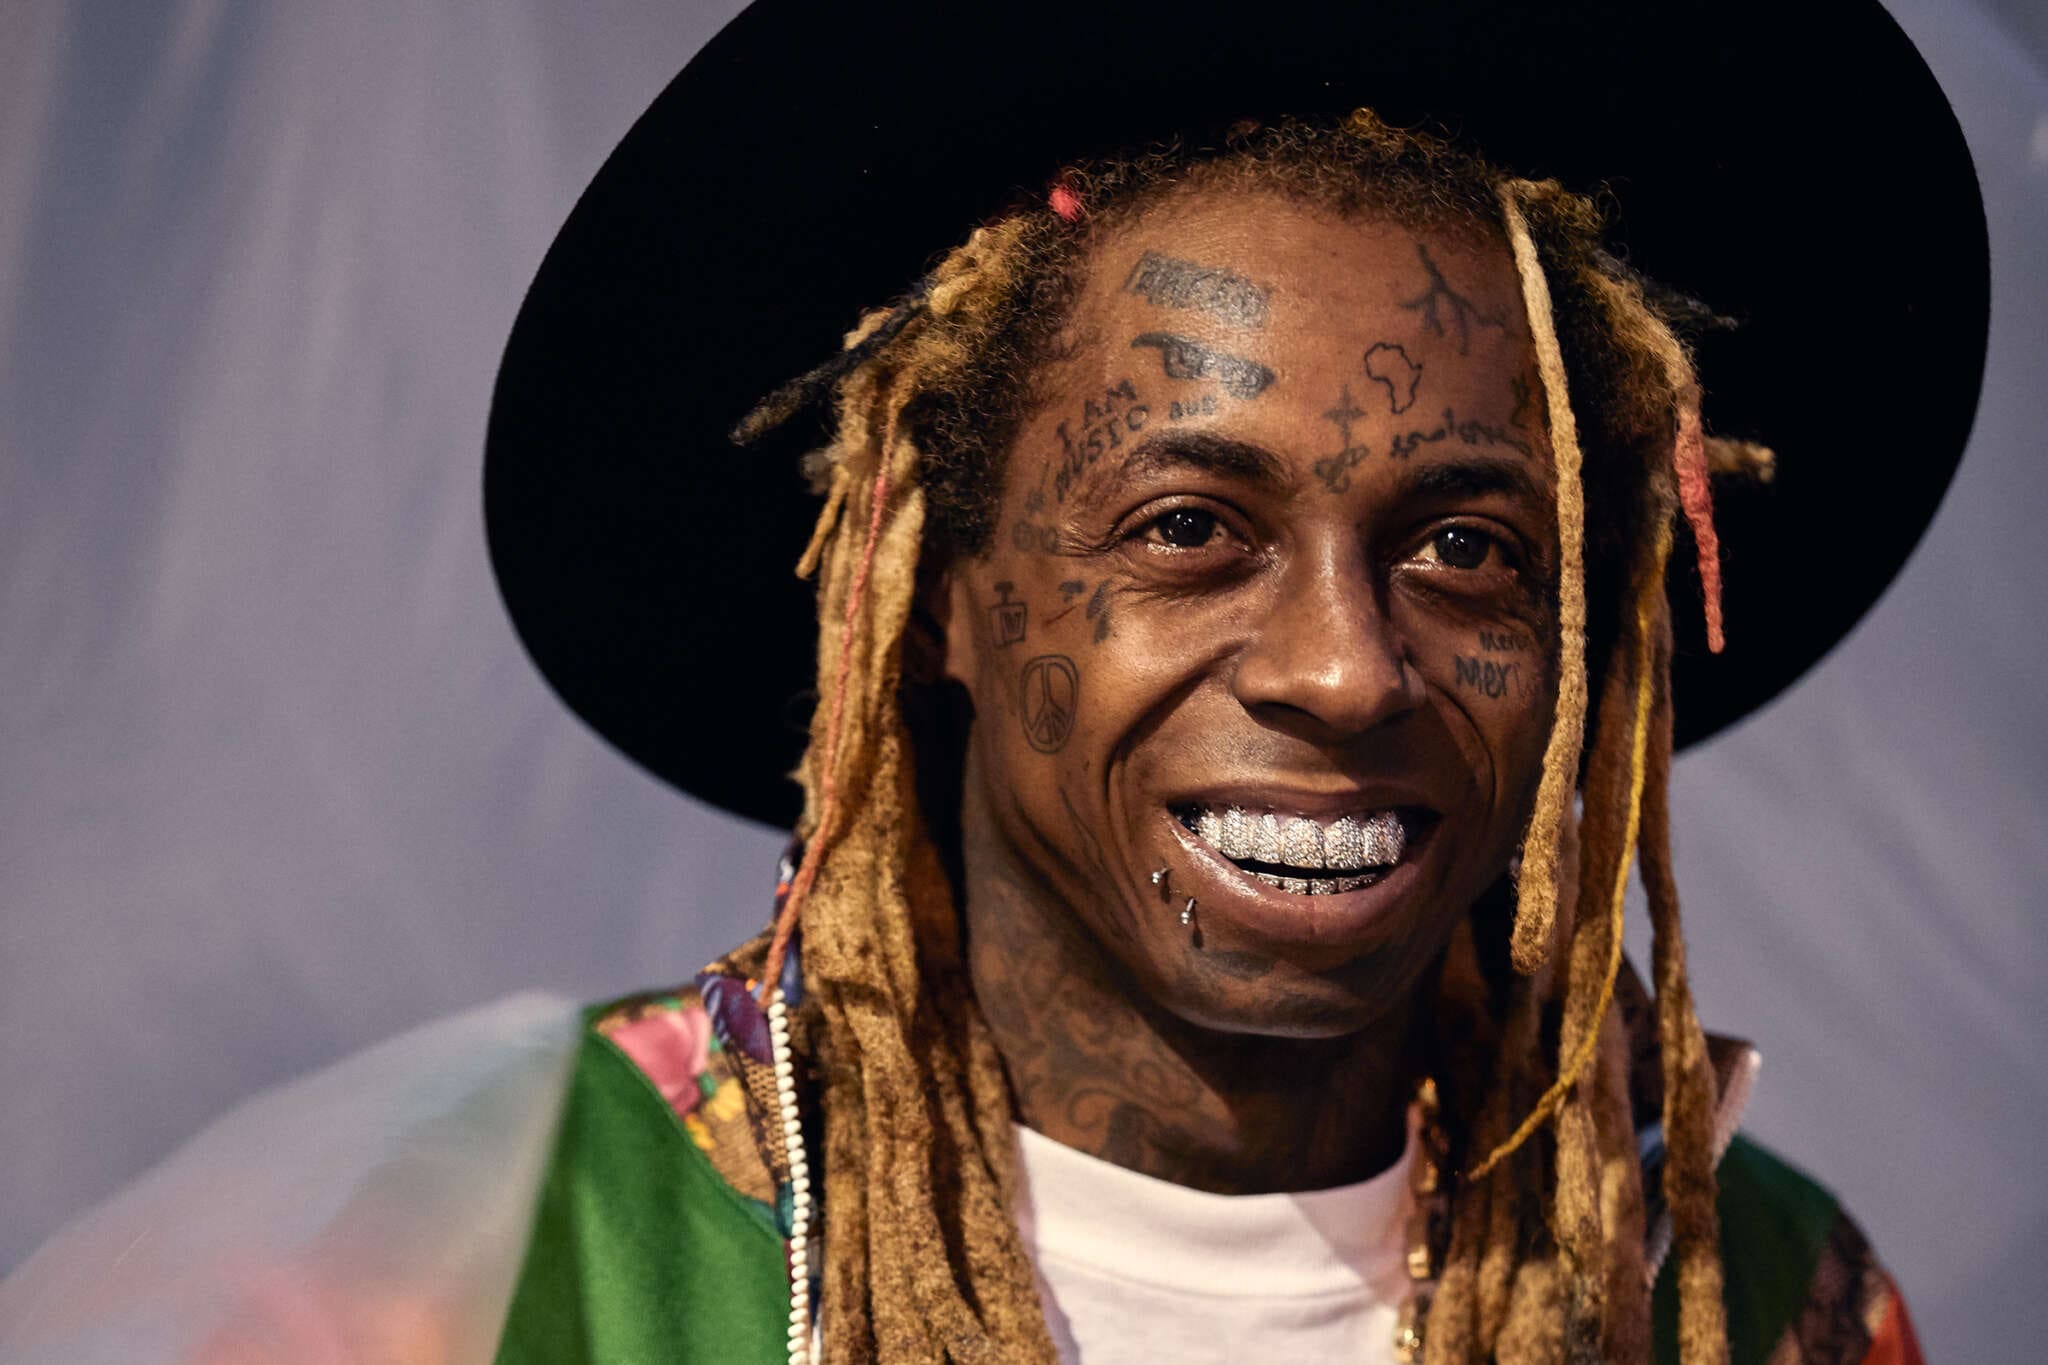 Lil Wayne Praises Dr. Martin Luther King Jr. - See His Message Here